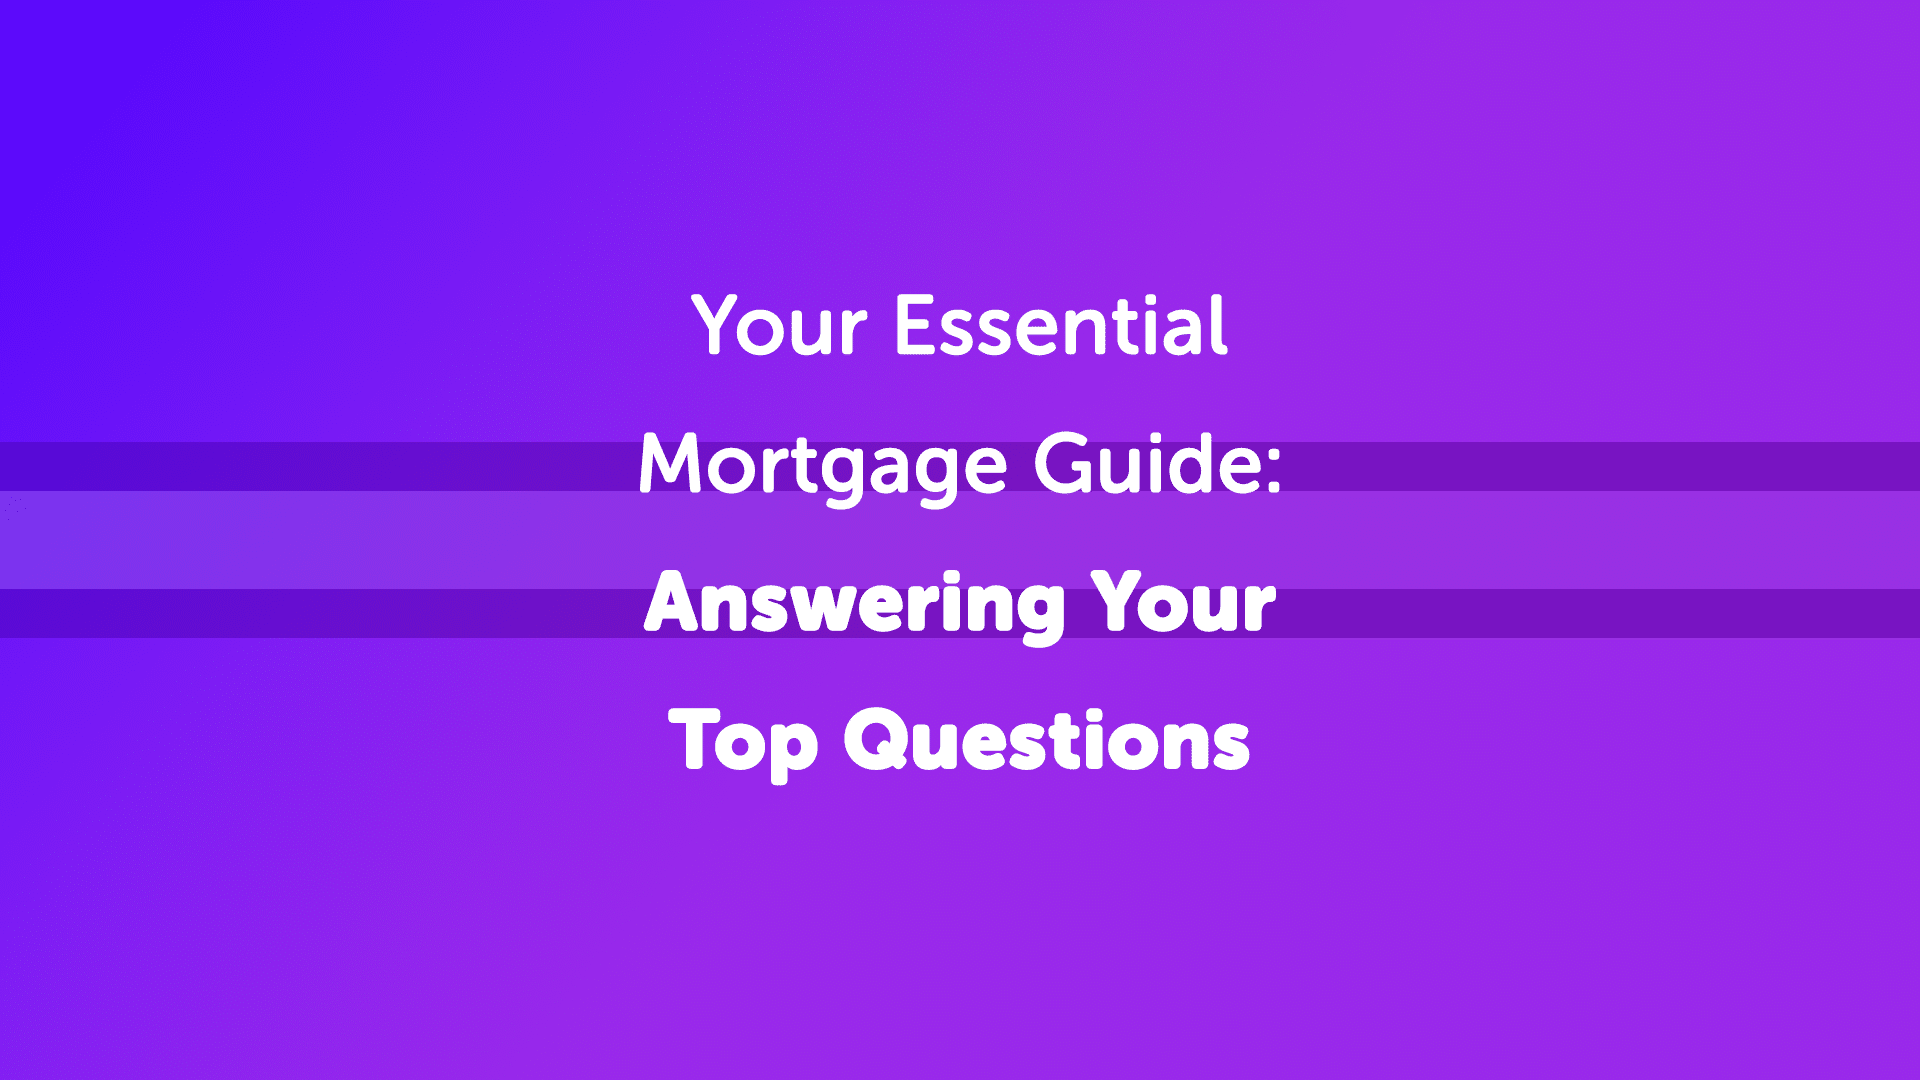 Your Essential Guide to Mortgages in Harrogate